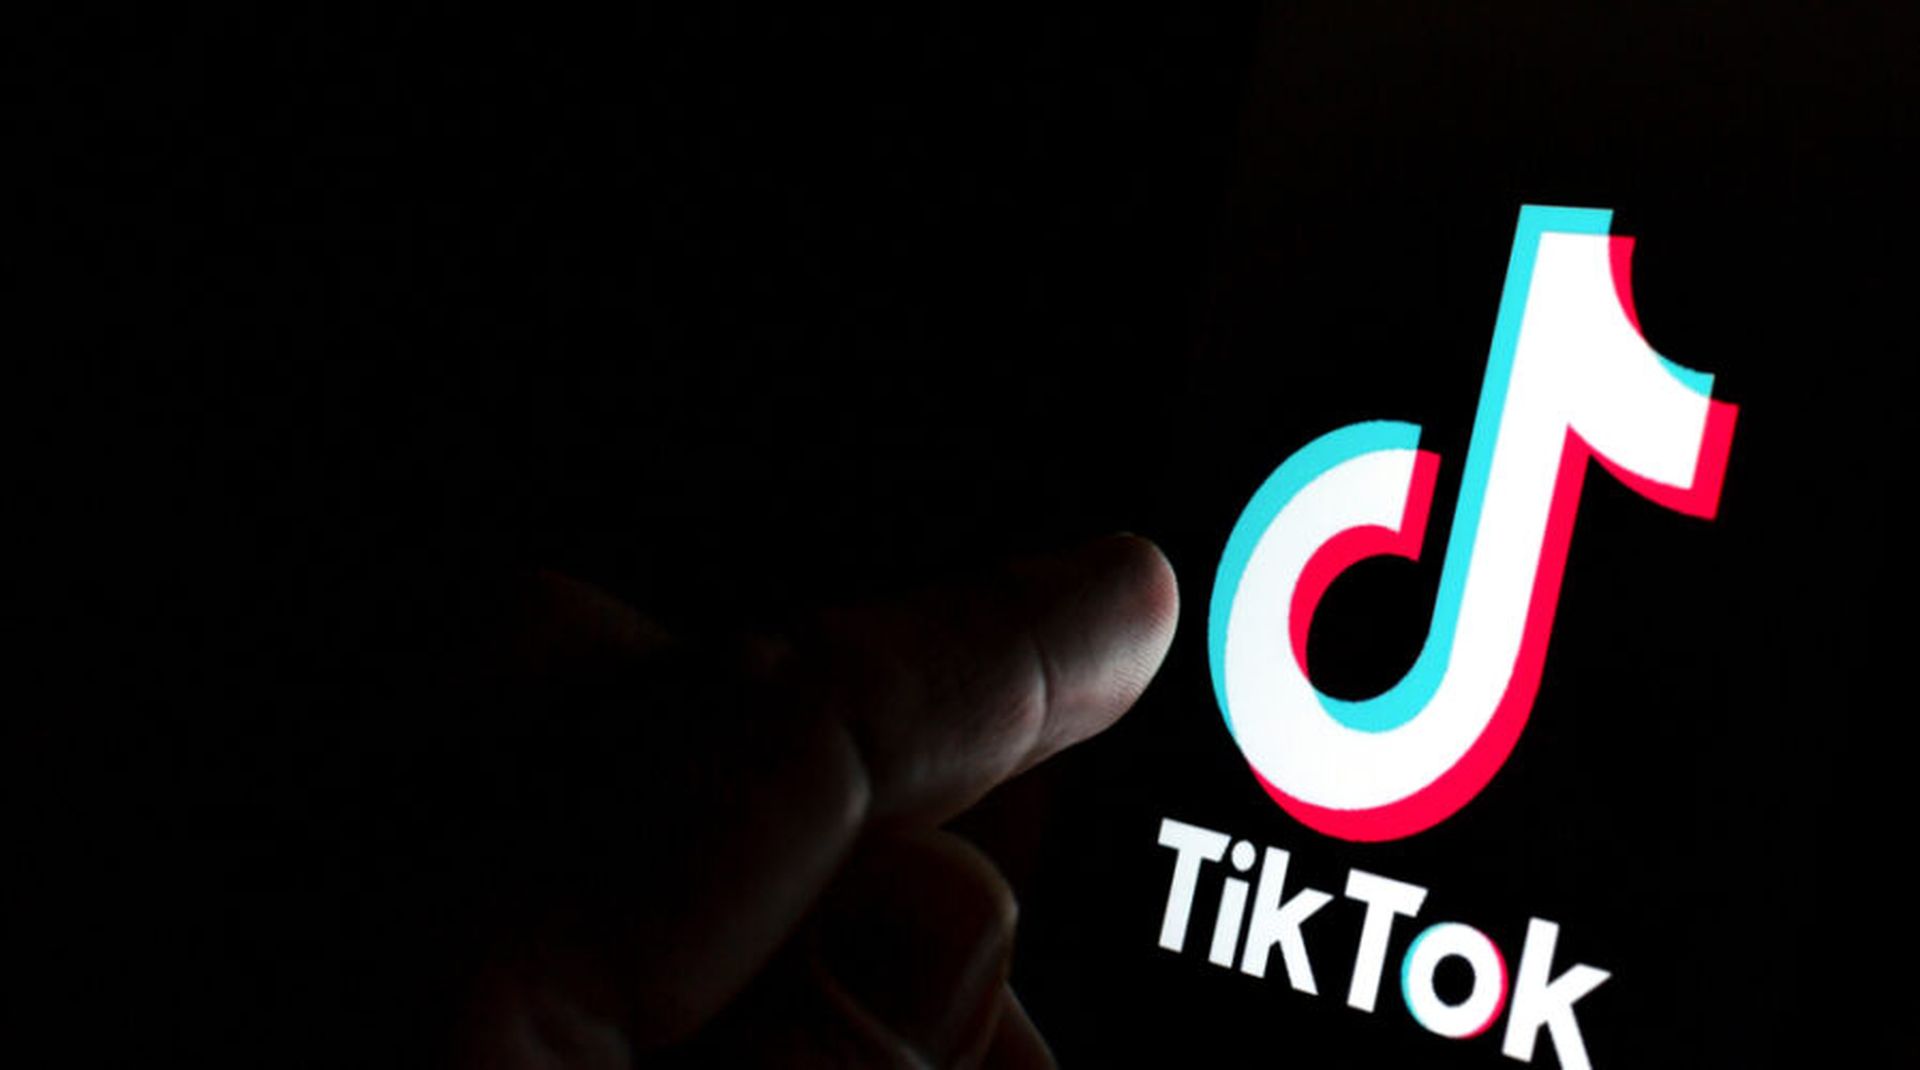 Hackers are targeting the TikTok Invisible body challenge participants